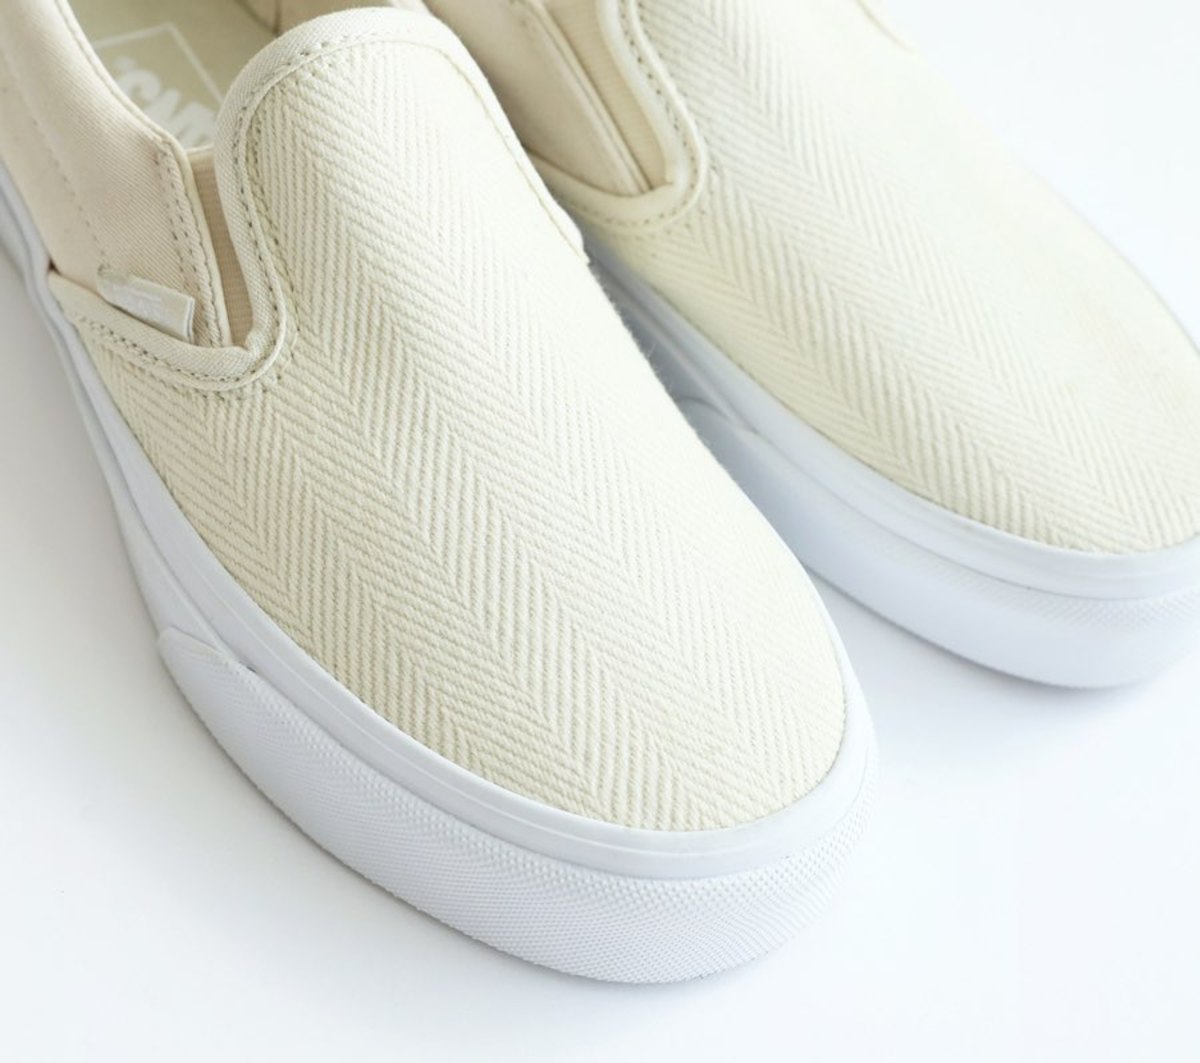 Edifice updates the Vans Slip-On with a 